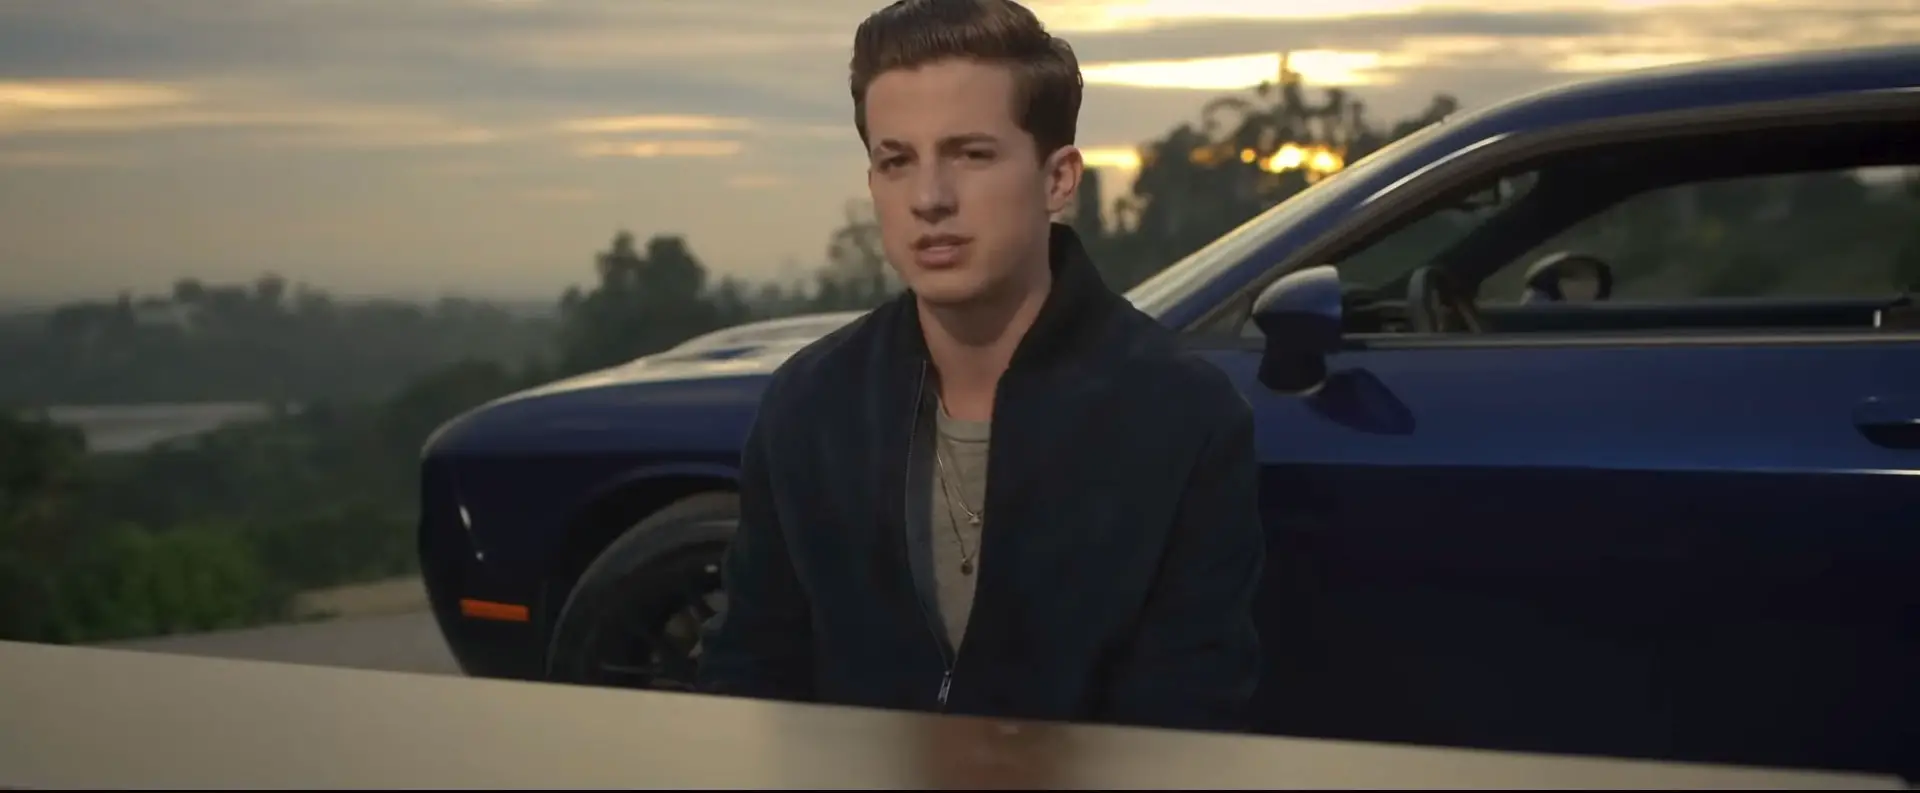 charlie puth fast and furious 7 song